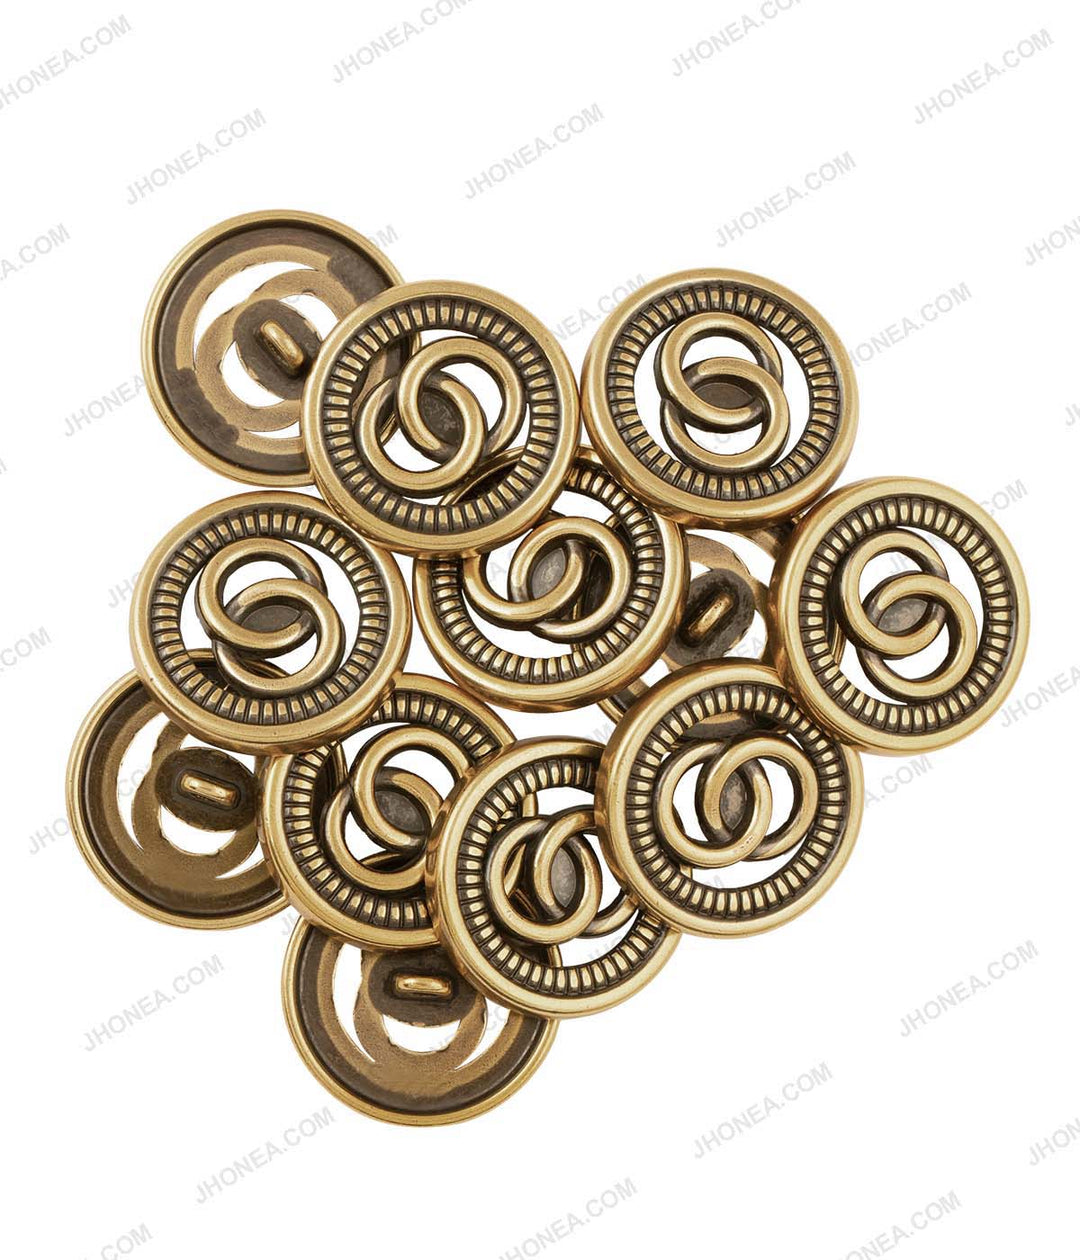 Antique Gold Infinity Design Metal Buttons for Men